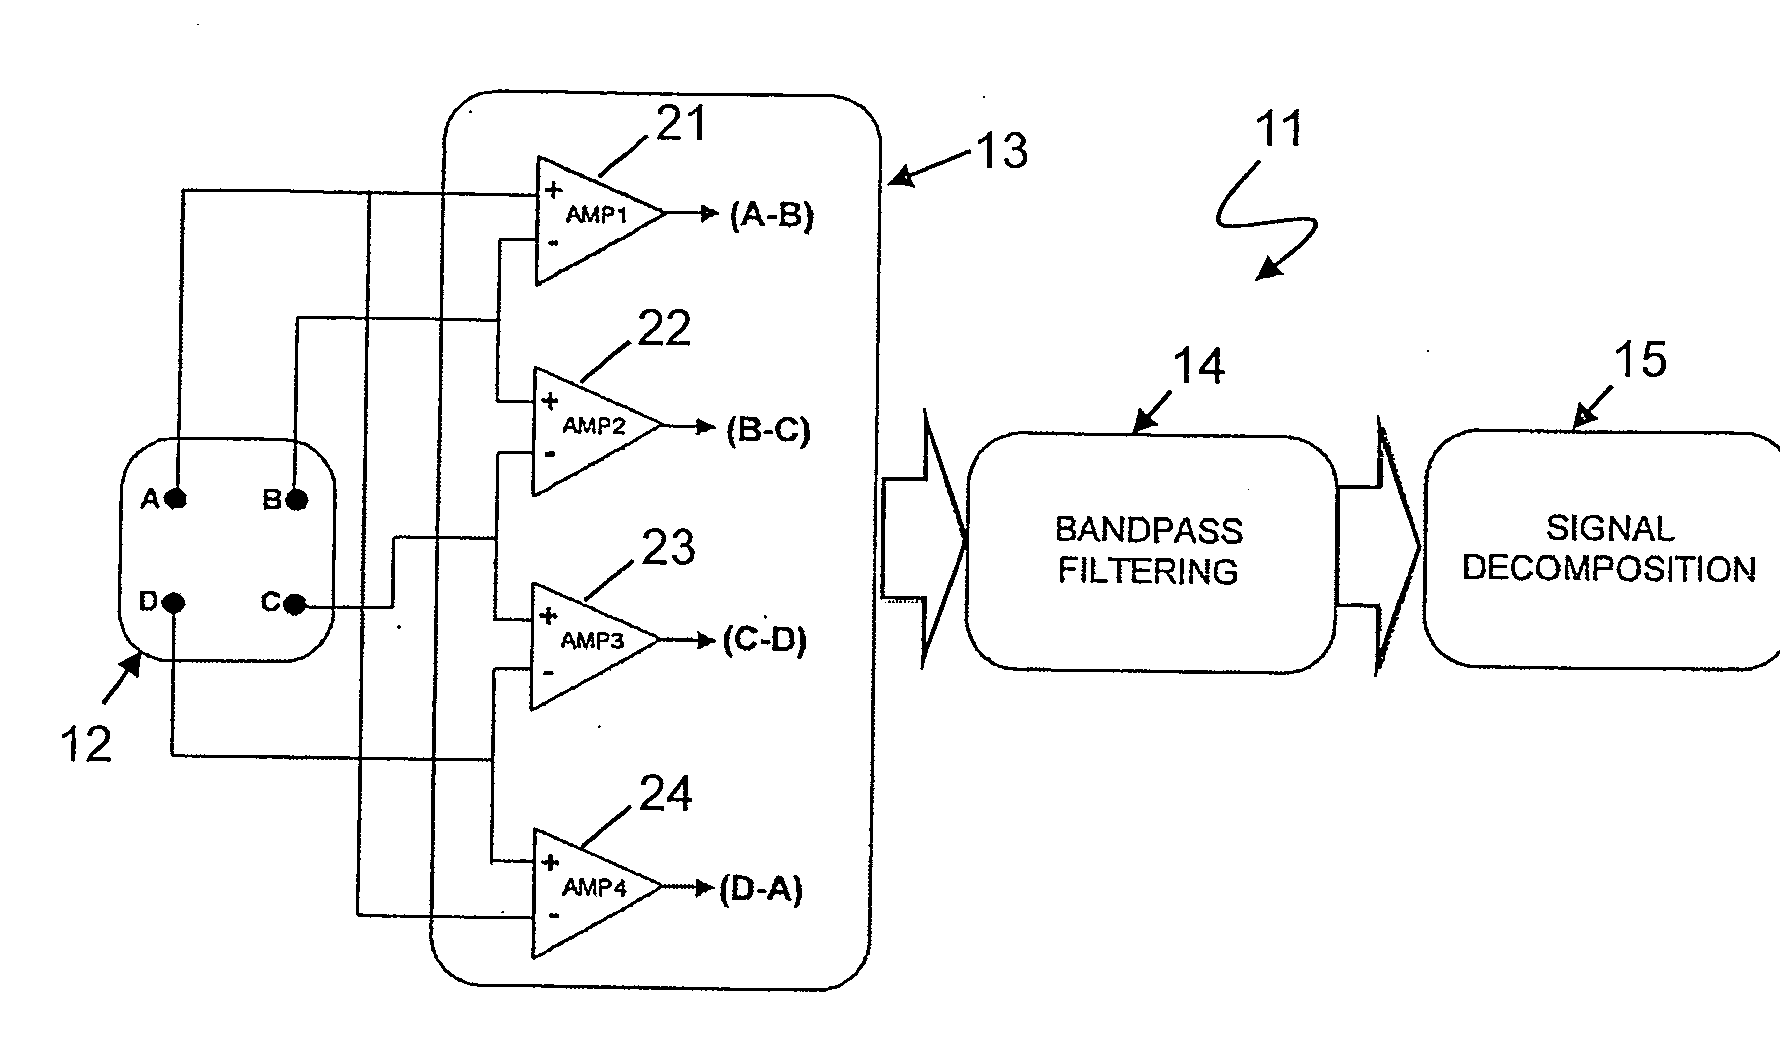 Sensor system for detecting and processing EMG signals